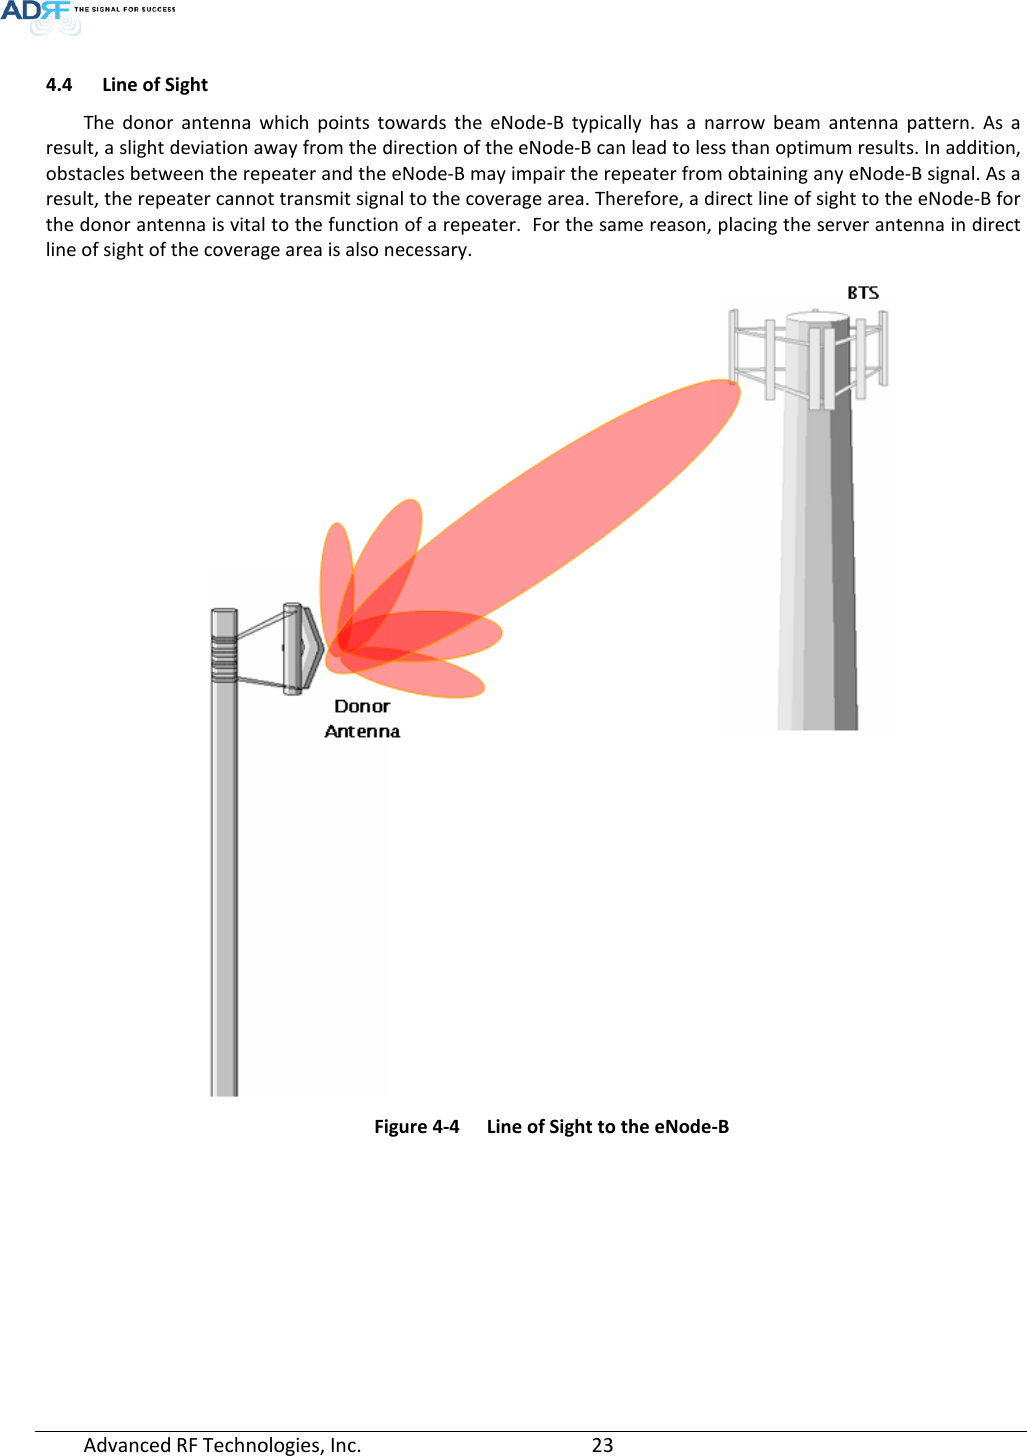  4.4 Line of Sight The donor antenna which points towards the eNode-B  typically has a narrow beam antenna pattern. As a result, a slight deviation away from the direction of the eNode-B can lead to less than optimum results. In addition, obstacles between the repeater and the eNode-B may impair the repeater from obtaining any eNode-B signal. As a result, the repeater cannot transmit signal to the coverage area. Therefore, a direct line of sight to the eNode-B for the donor antenna is vital to the function of a repeater.  For the same reason, placing the server antenna in direct line of sight of the coverage area is also necessary.   Figure 4-4  Line of Sight to the eNode-B     Advanced RF Technologies, Inc.       23    